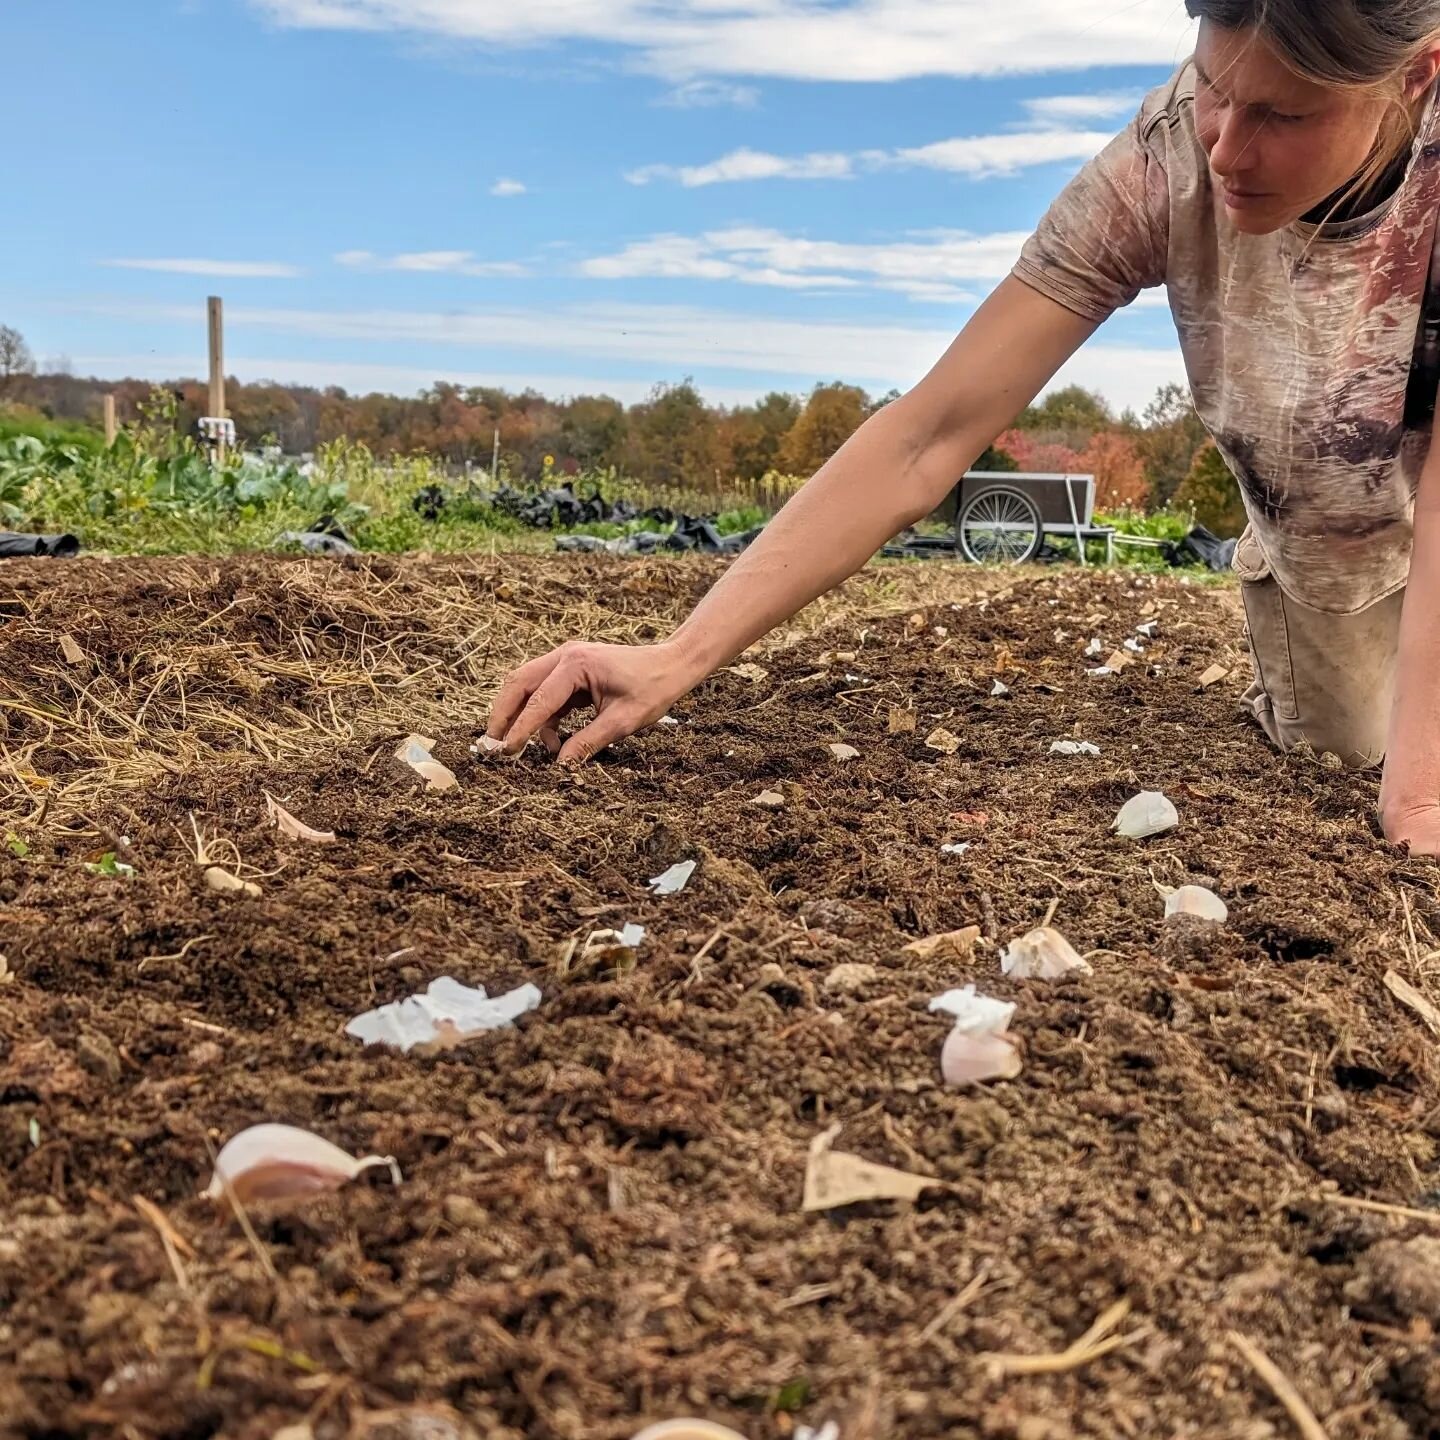 It seems surreal to post about farming right now. Planting garlic is such a definitive and hopeful time of the season. It marks a change, the nearing of the end of the season, the promise of the next. I wonder what the world will look like at harvest